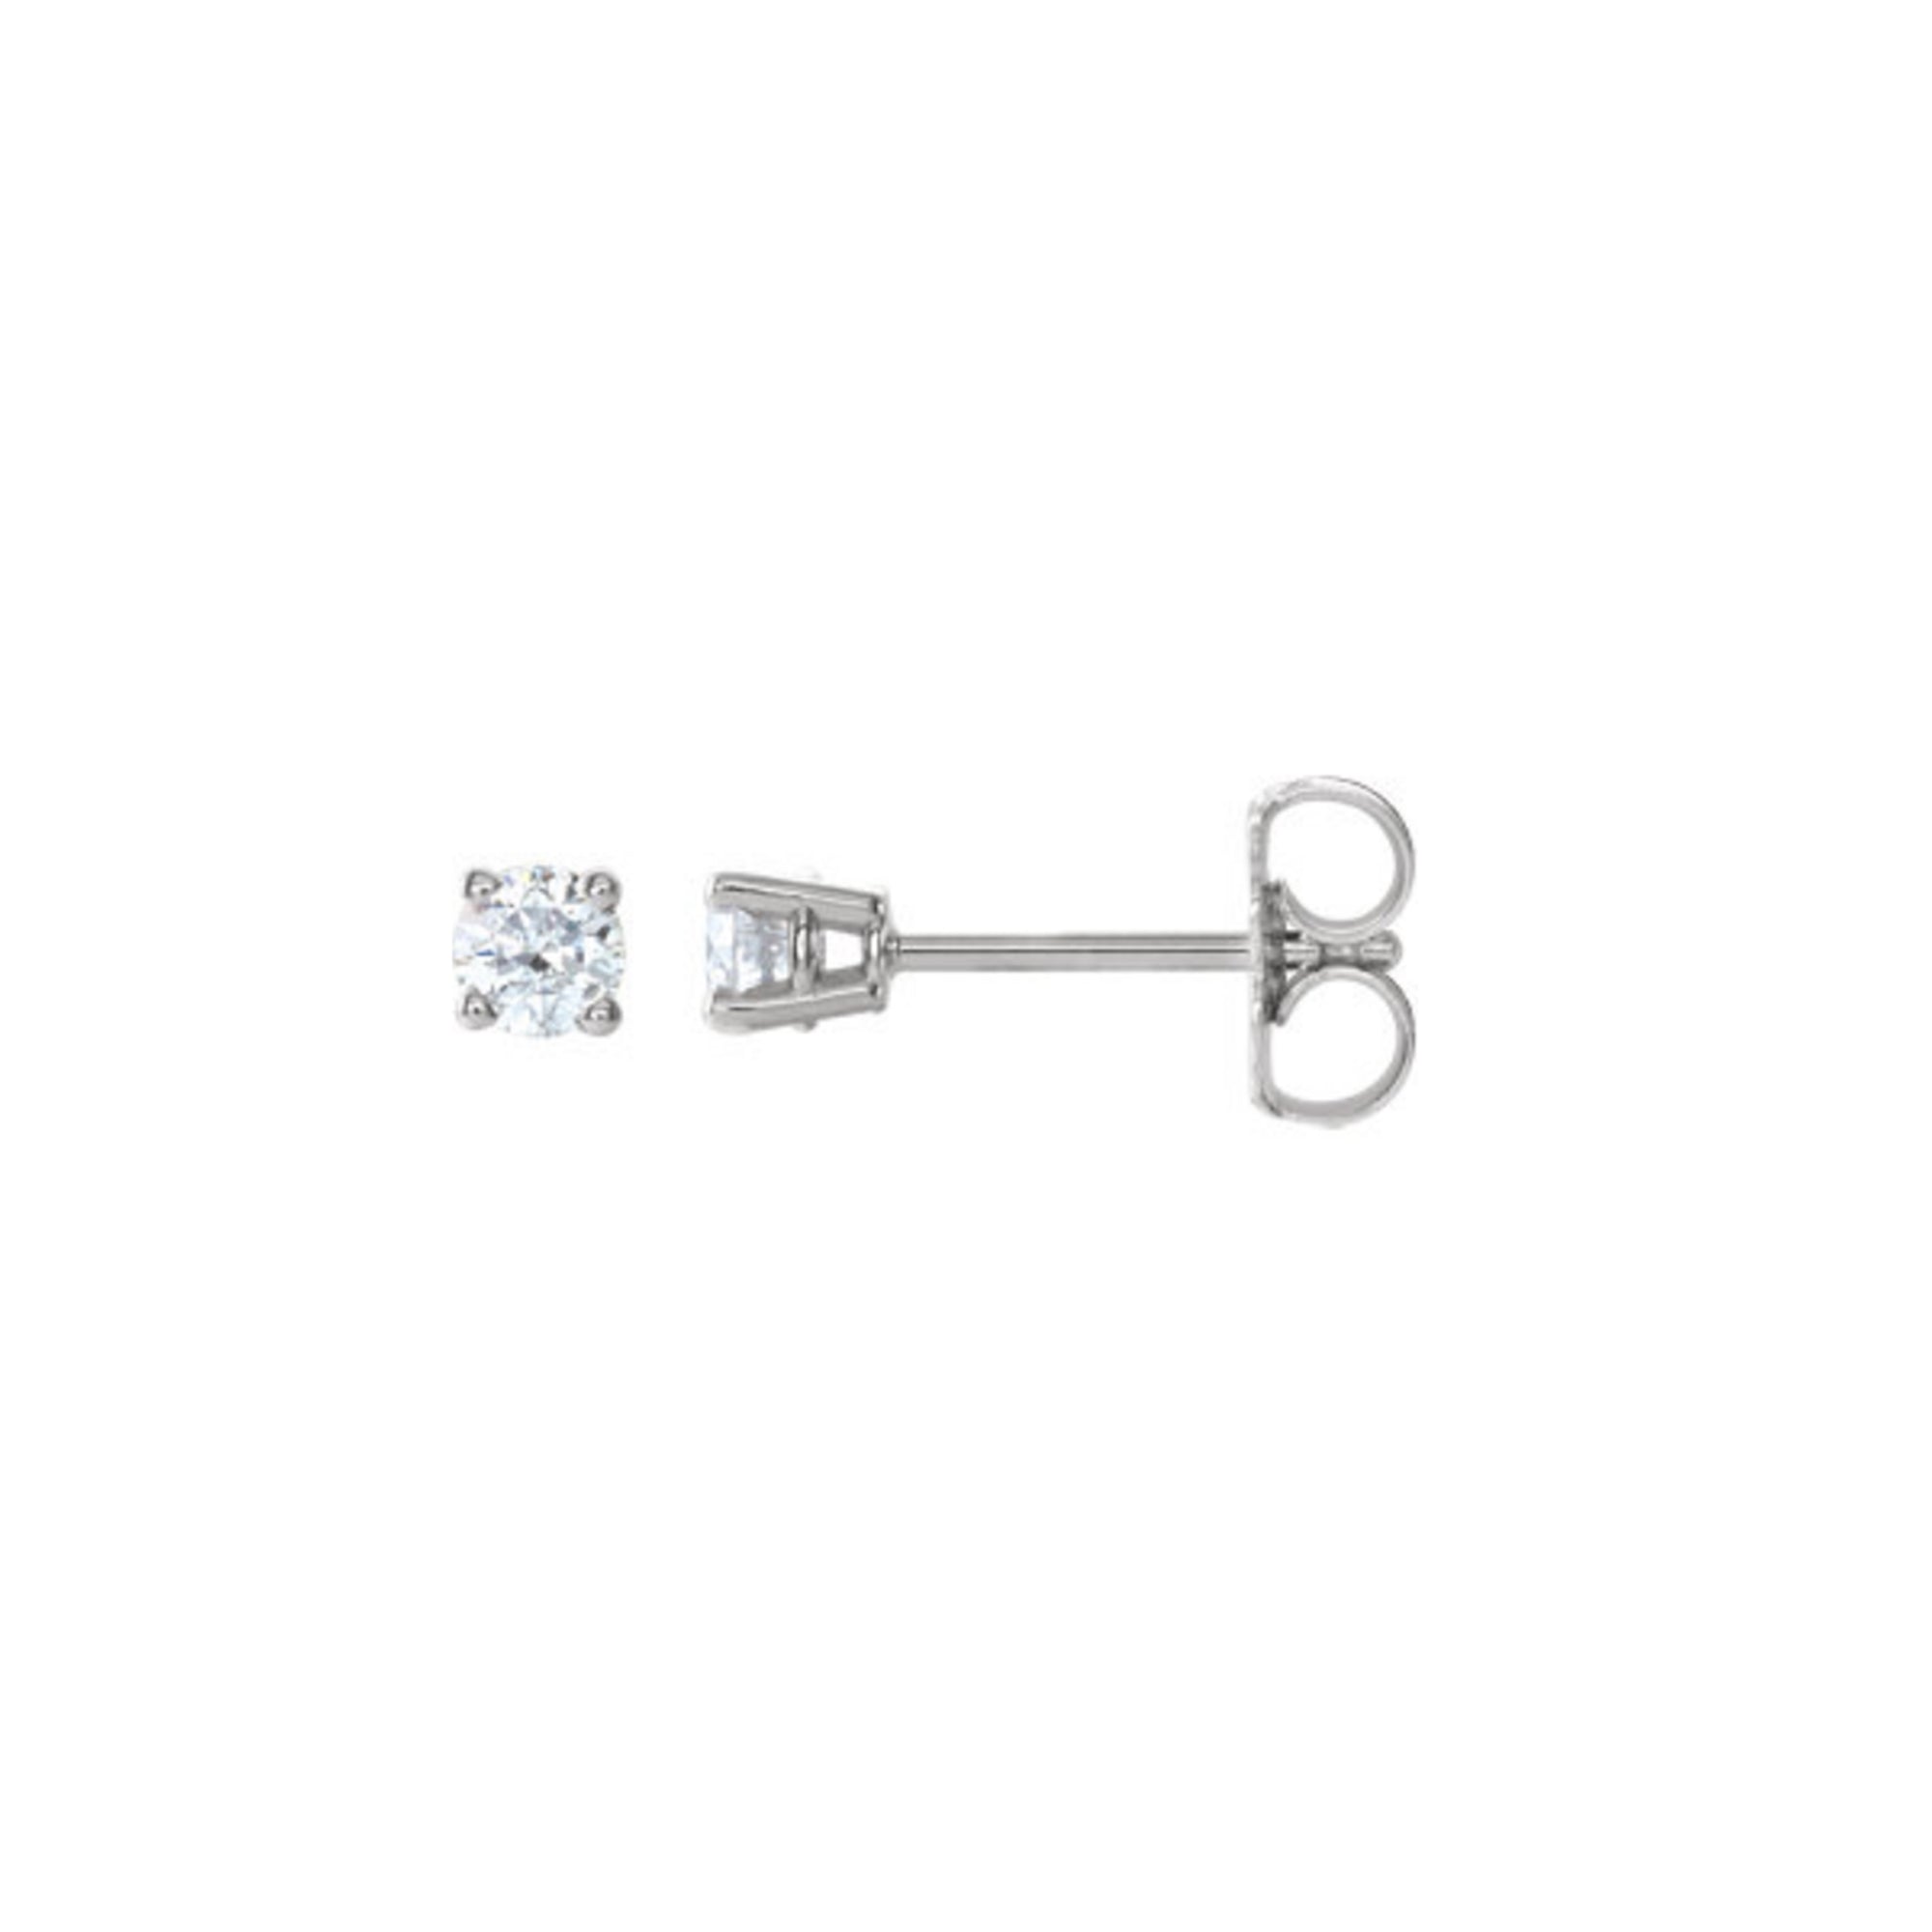 Diamond Stud Earrings, 0.25 Carat Total Weight in 14k White, Yellow or Rose Gold - Talisman Collection Fine Jewelers